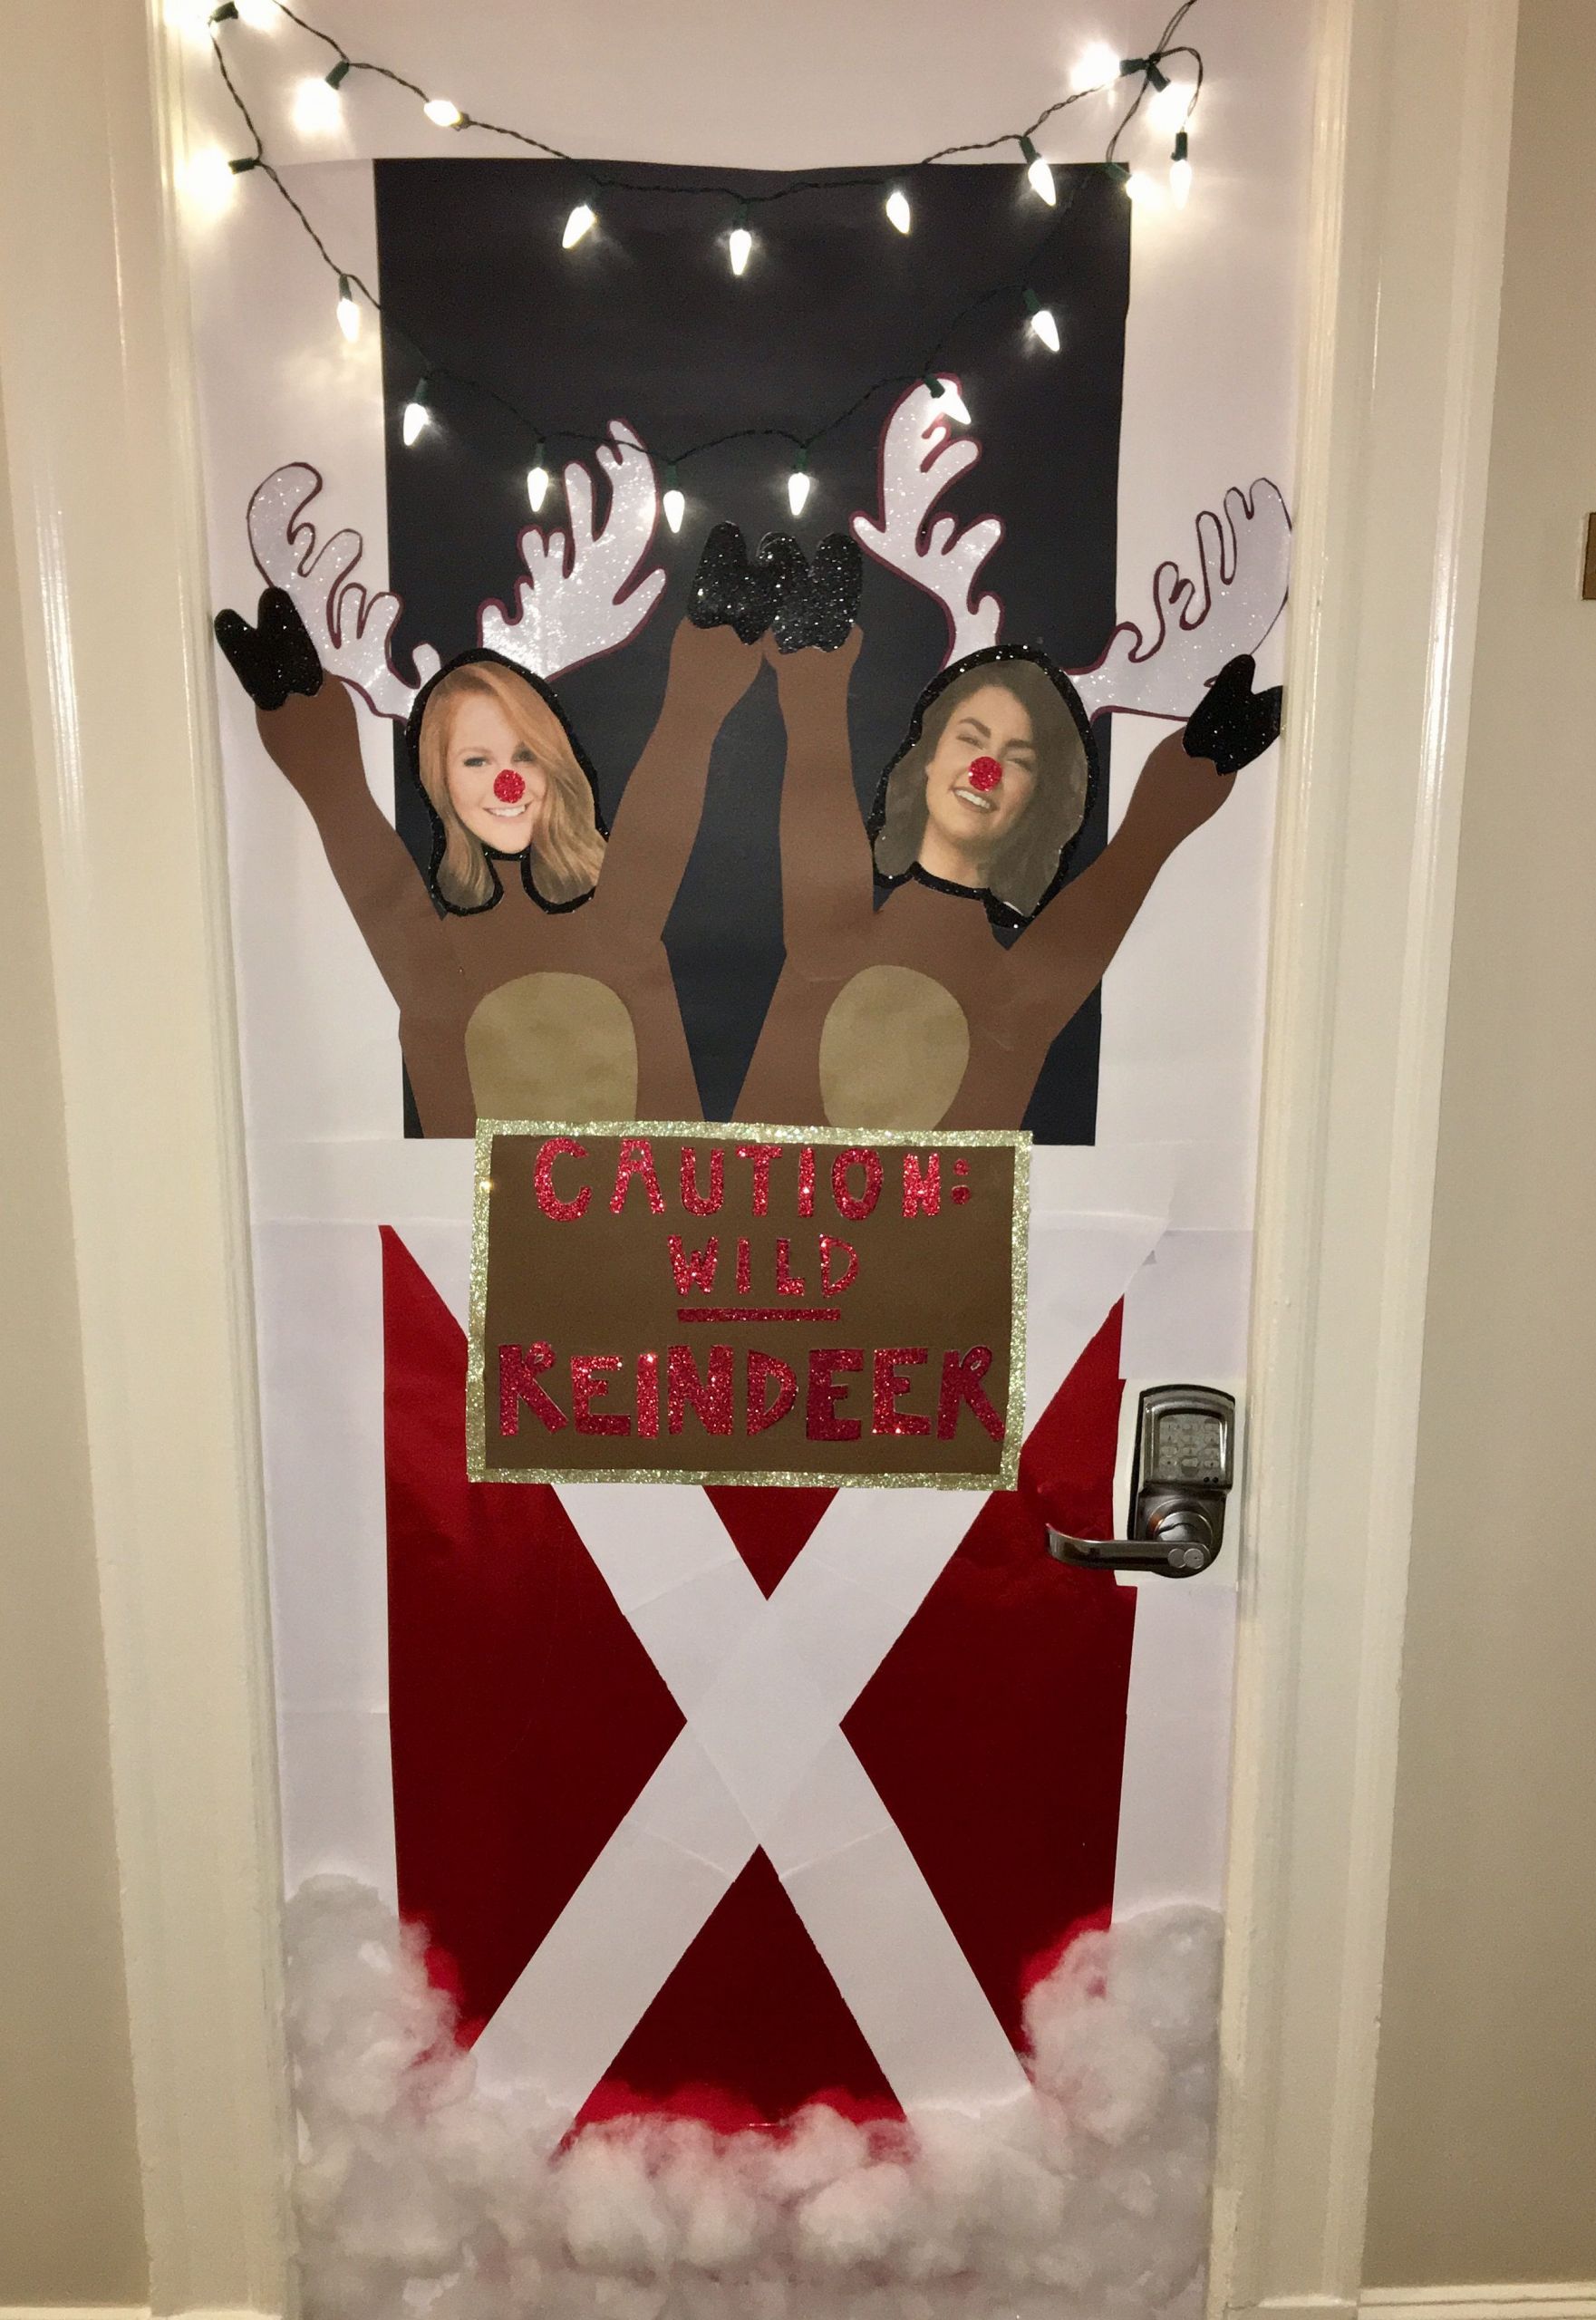 Christmas Door Decoration Ideas
 Oh deer This is for our door decorating contest we have